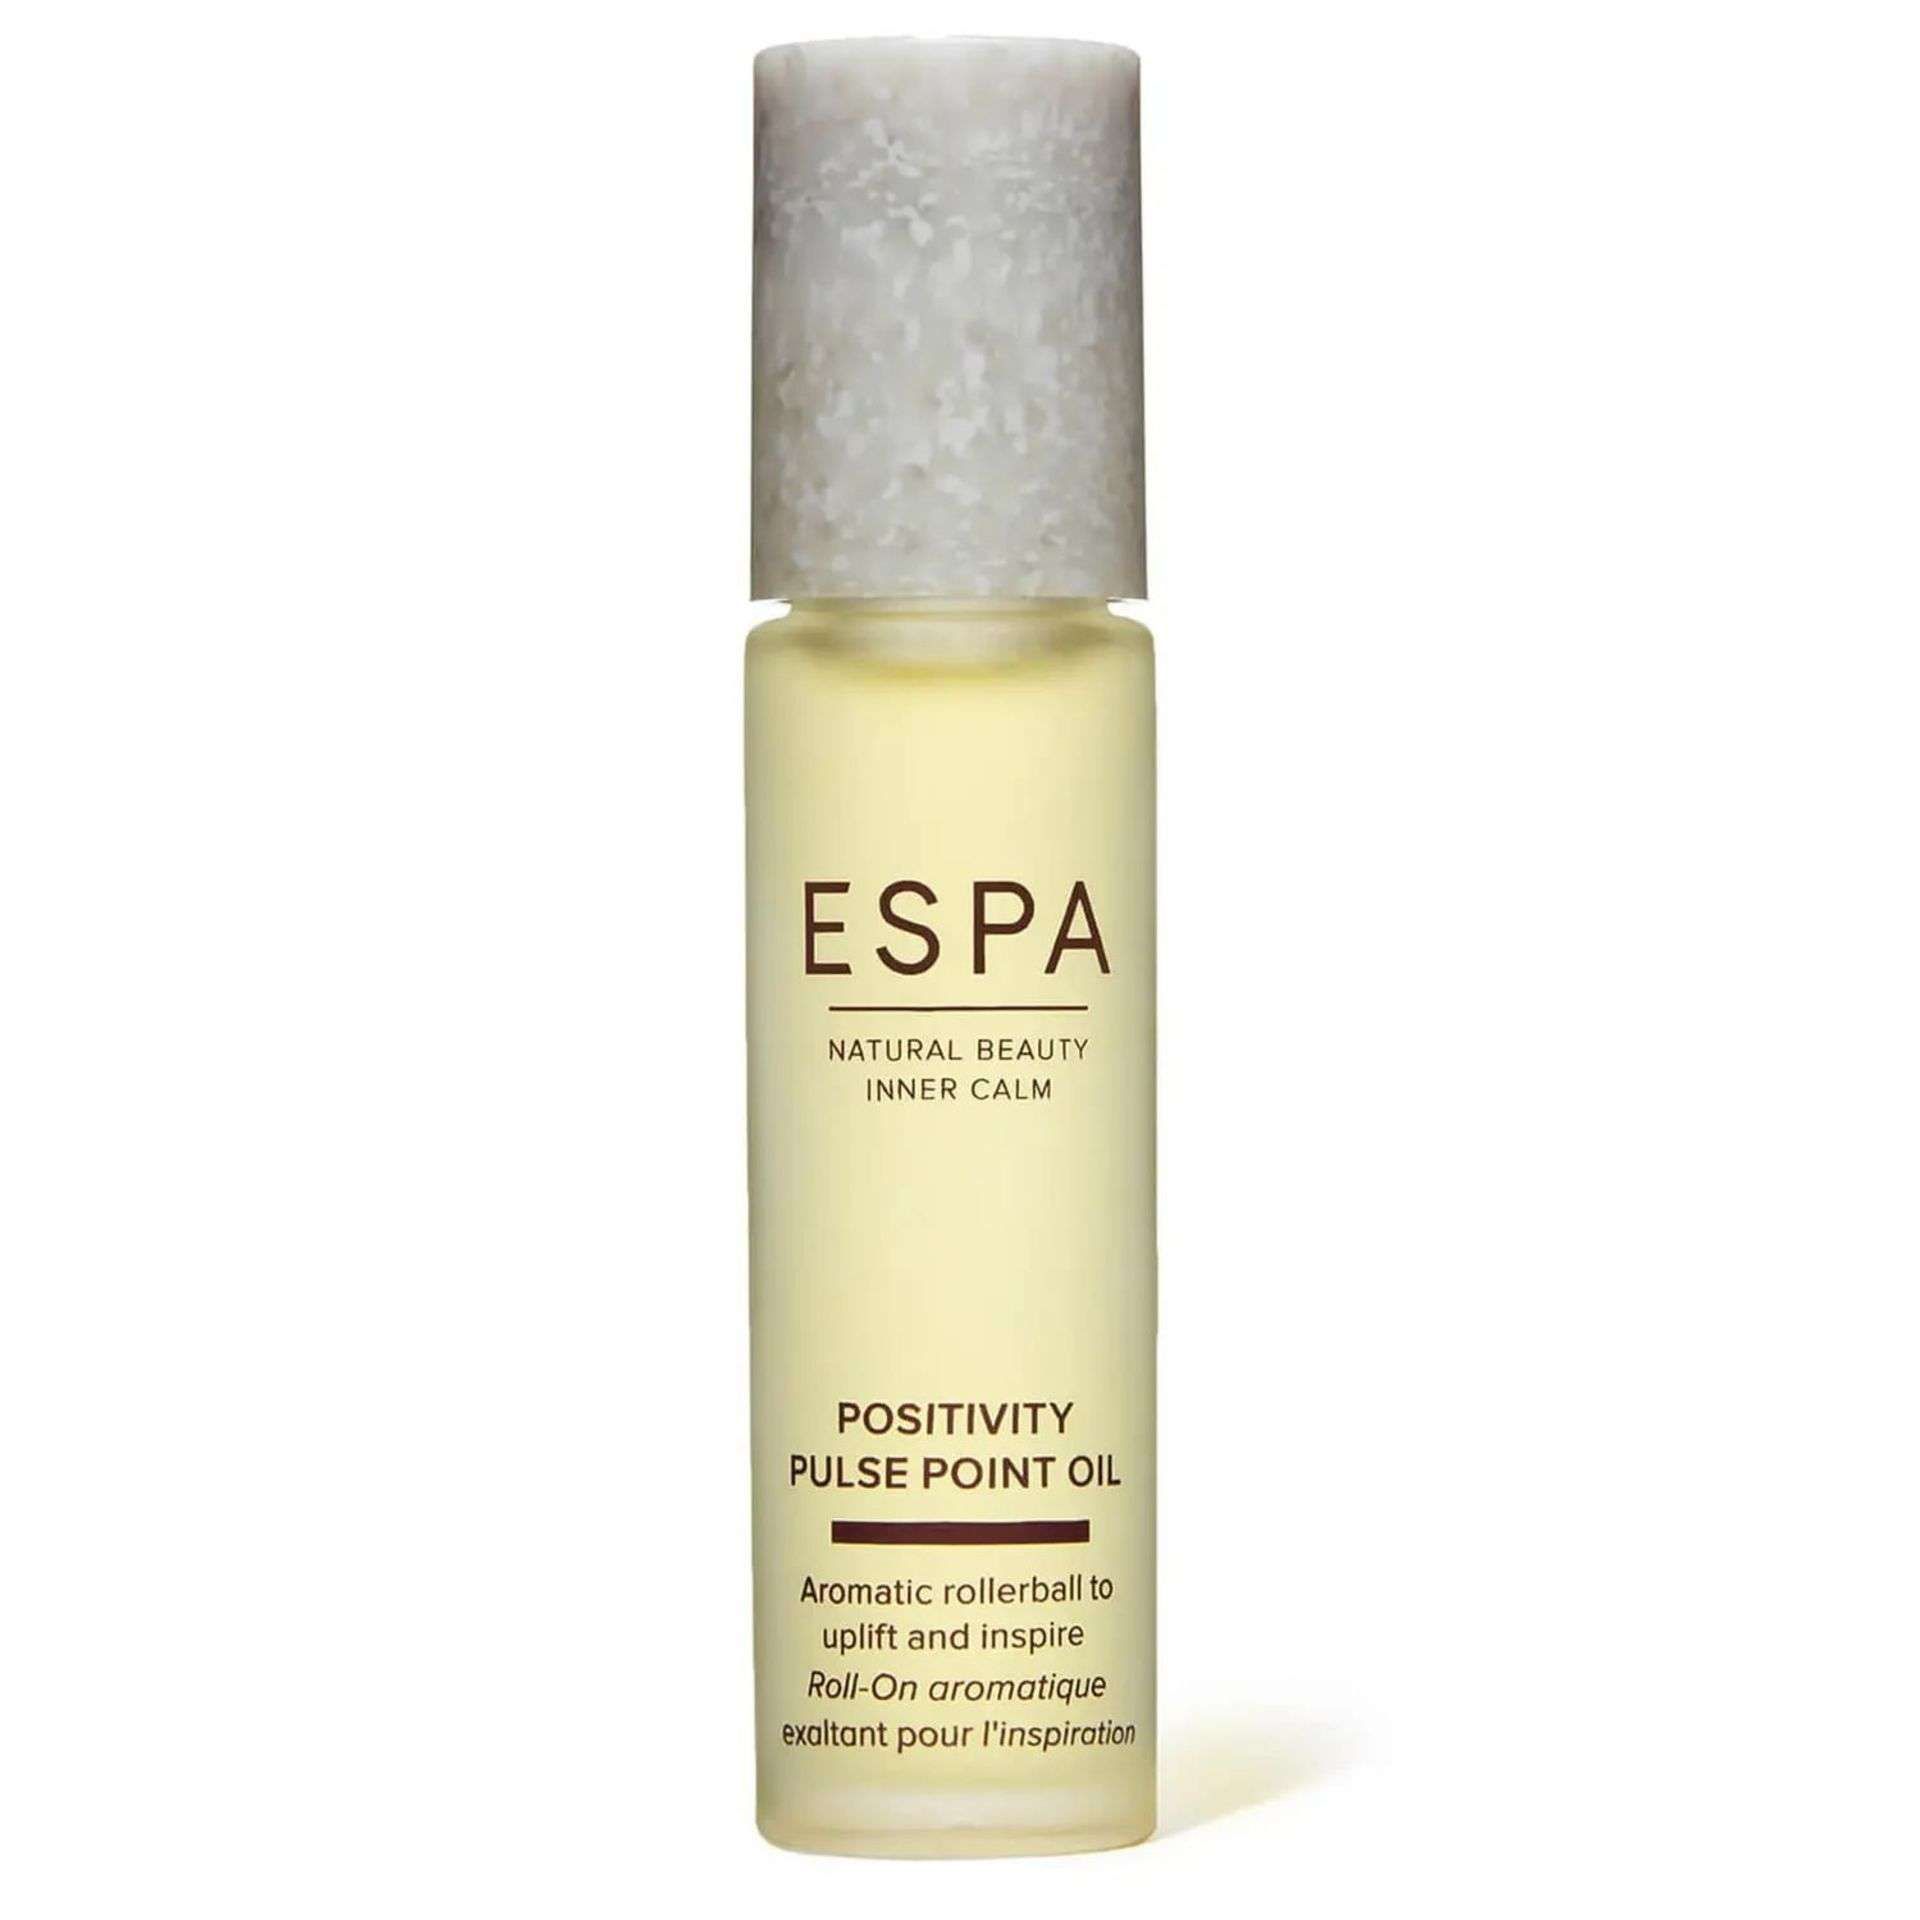 12x BRAND NEW ESPA Positivity Pulse Point Oil 9ml RRP £23 EACH. EBR5. The perfect size to carry